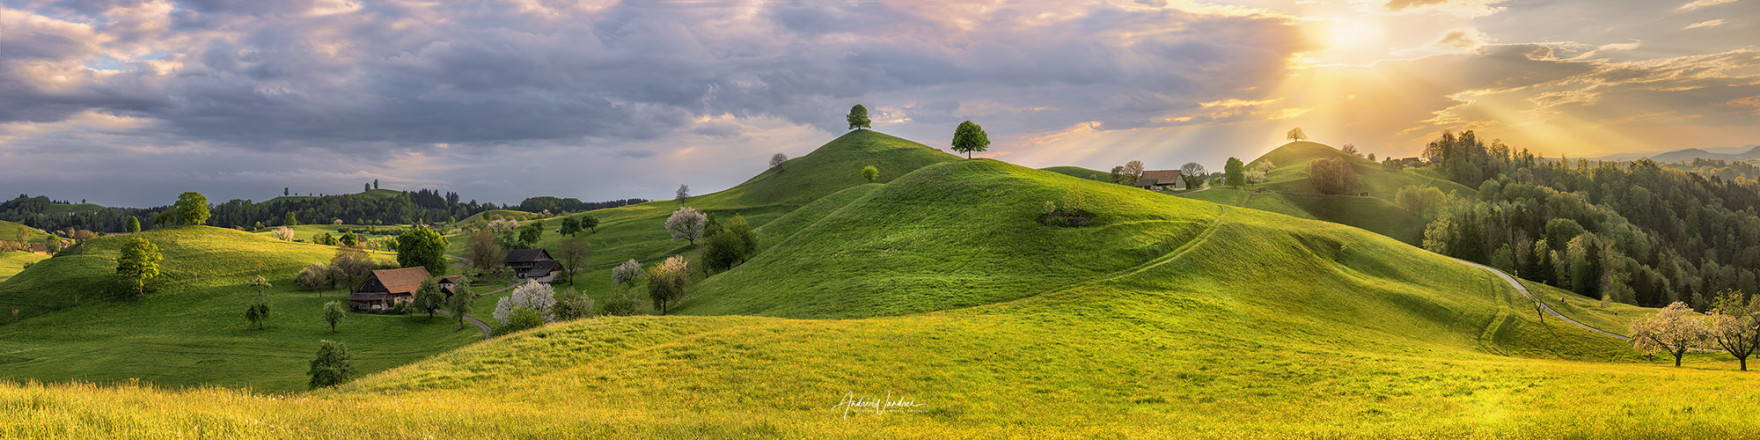 (No. 20-043) Hilly landscape in evening light (4 to 1 panorama)